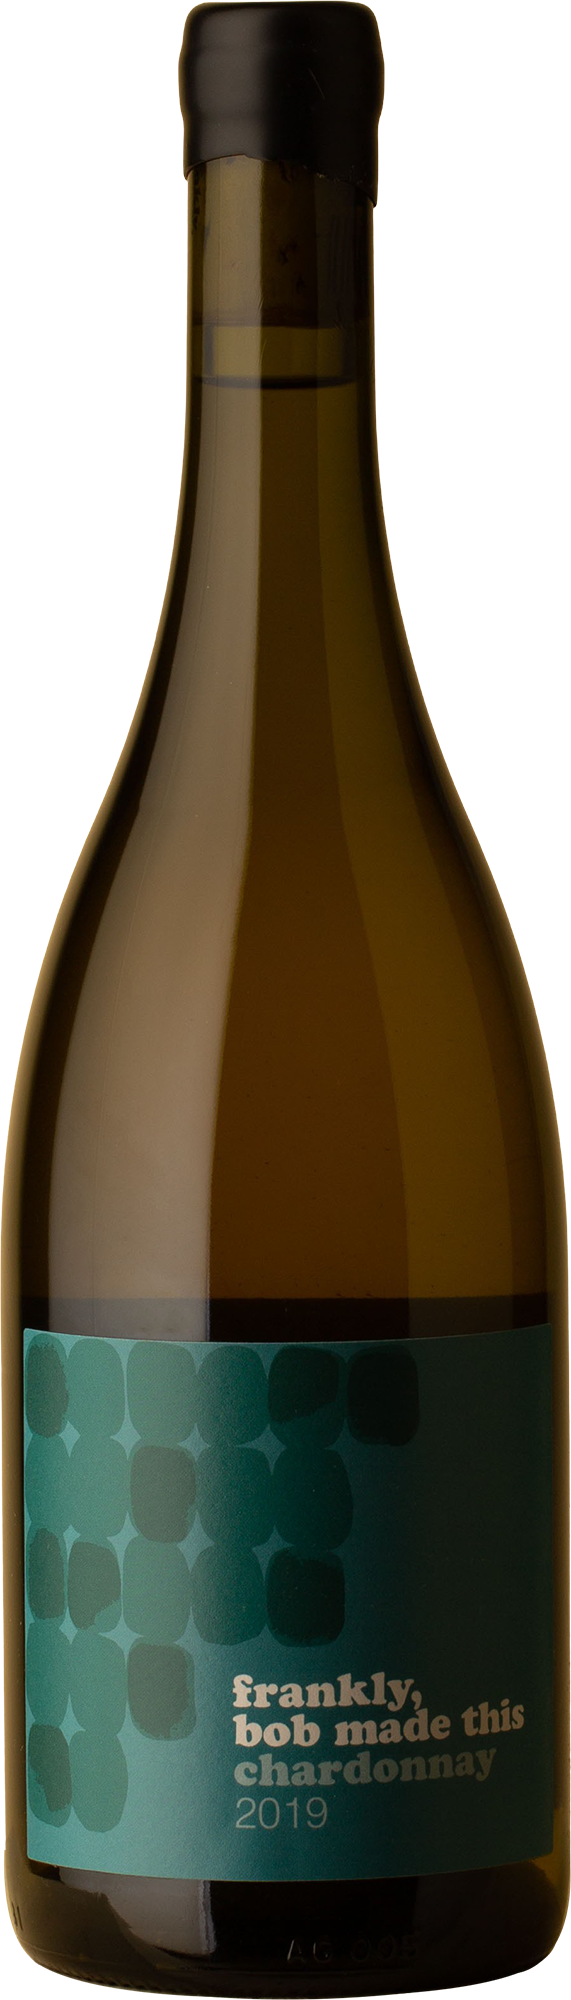 Frankly This Wine Was Made By Bob - Chardonnay 2019 White Wine